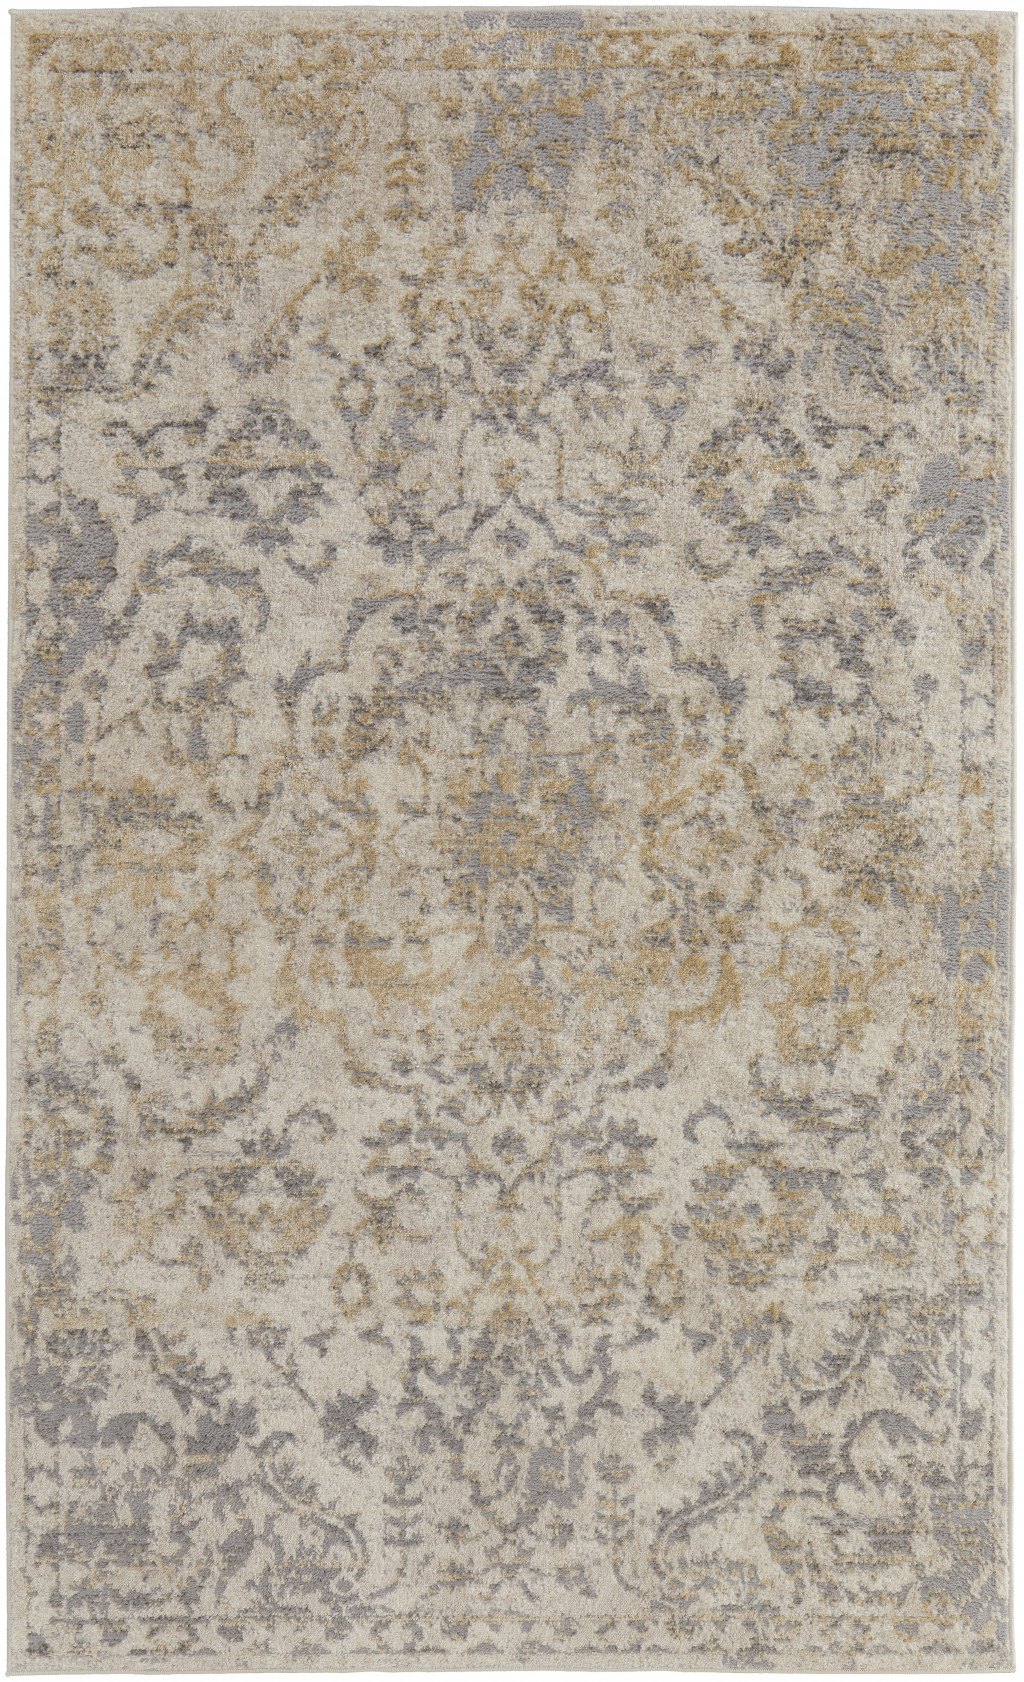 8' X 10' Gray Ivory And Gold Floral Power Loom Distressed Area Rug-513287-1